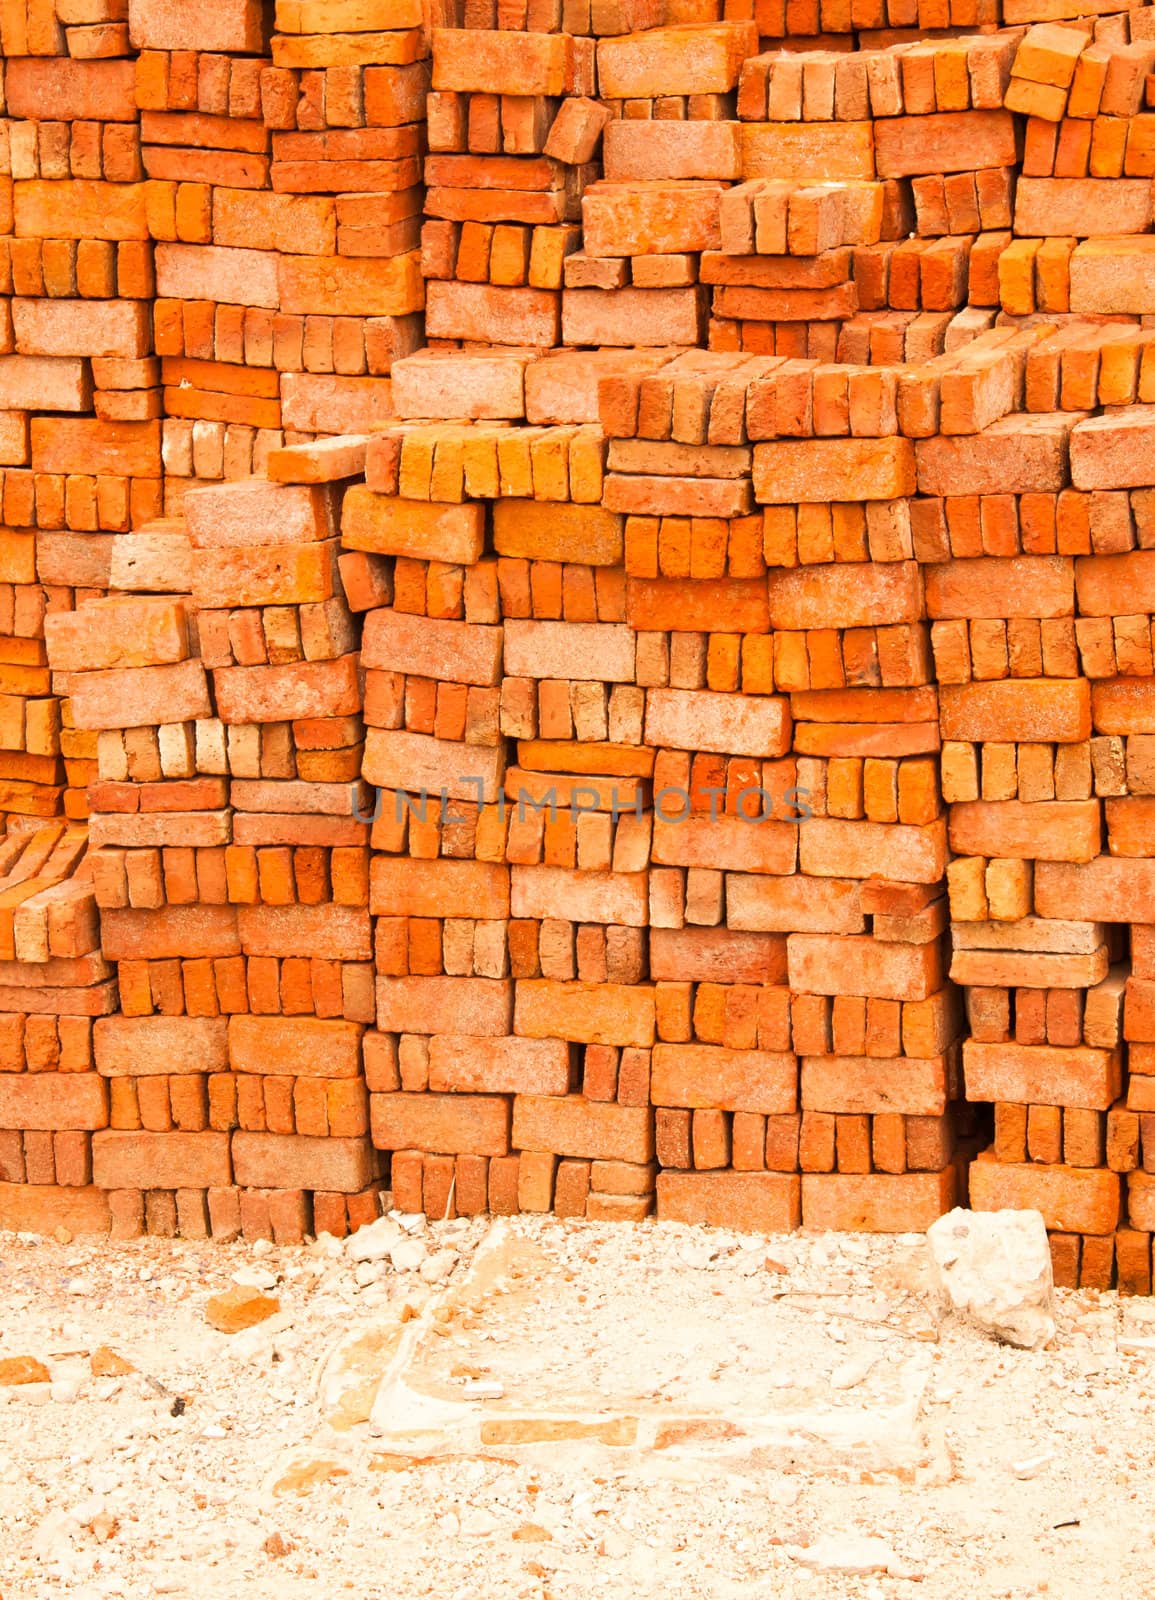 Lots of red brick. The stacked into a wall to be used in construction.